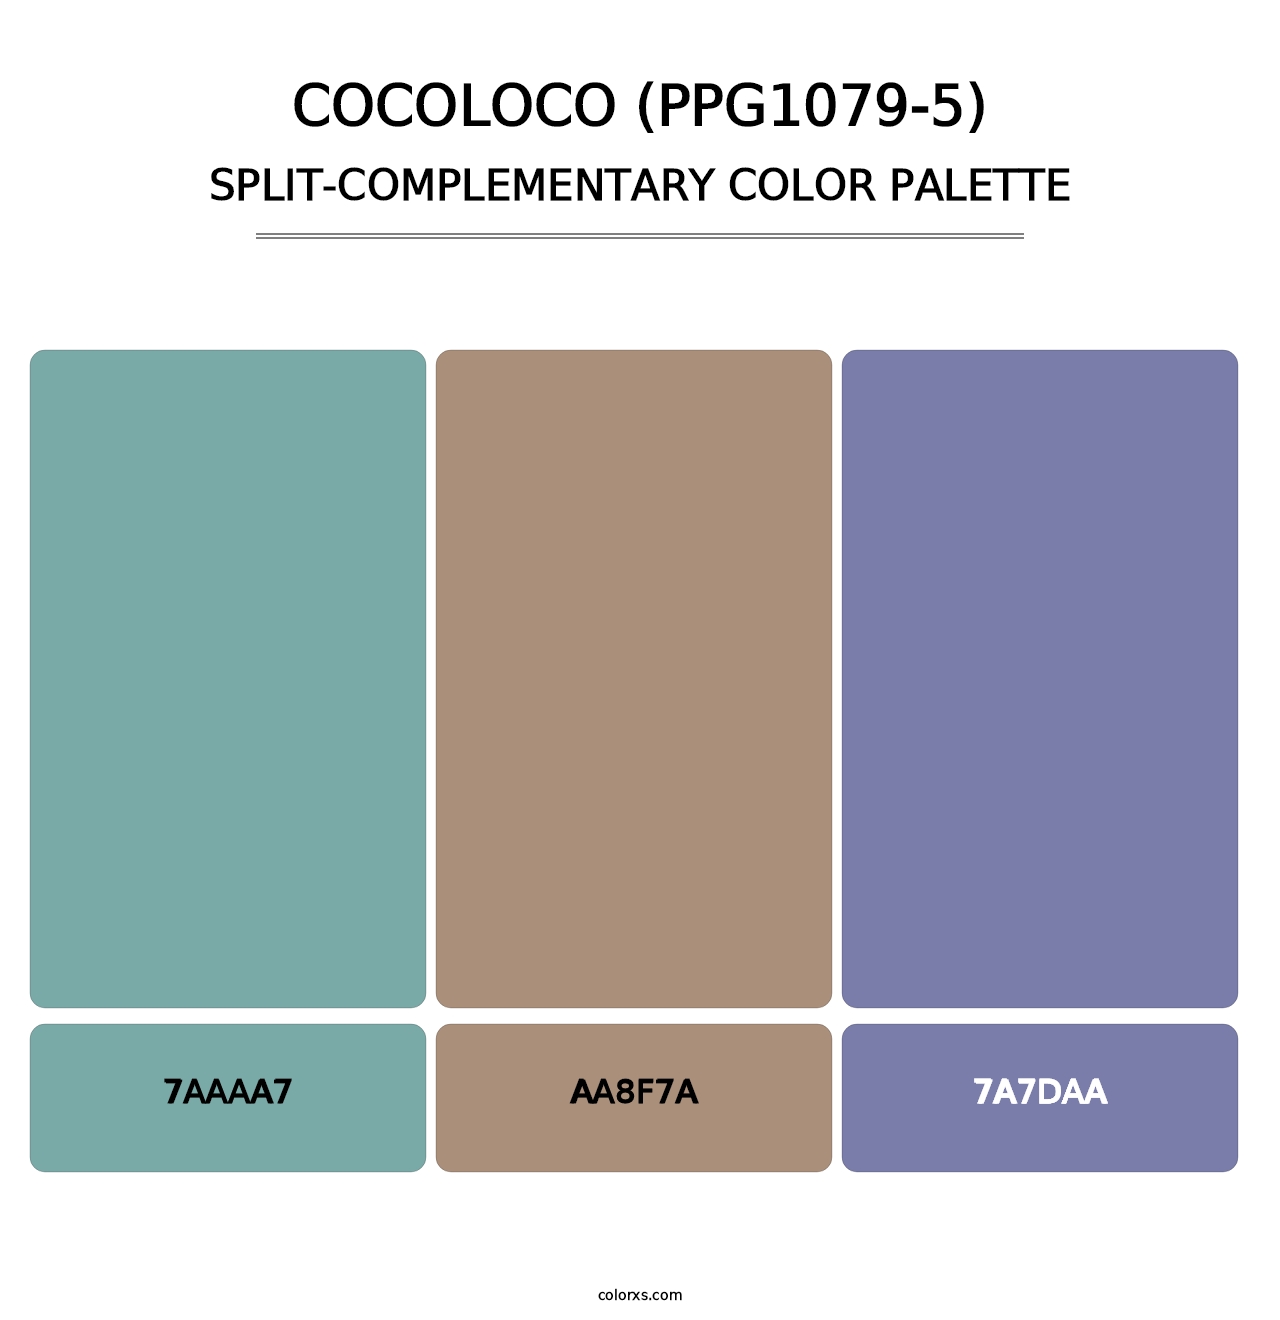 Cocoloco (PPG1079-5) - Split-Complementary Color Palette